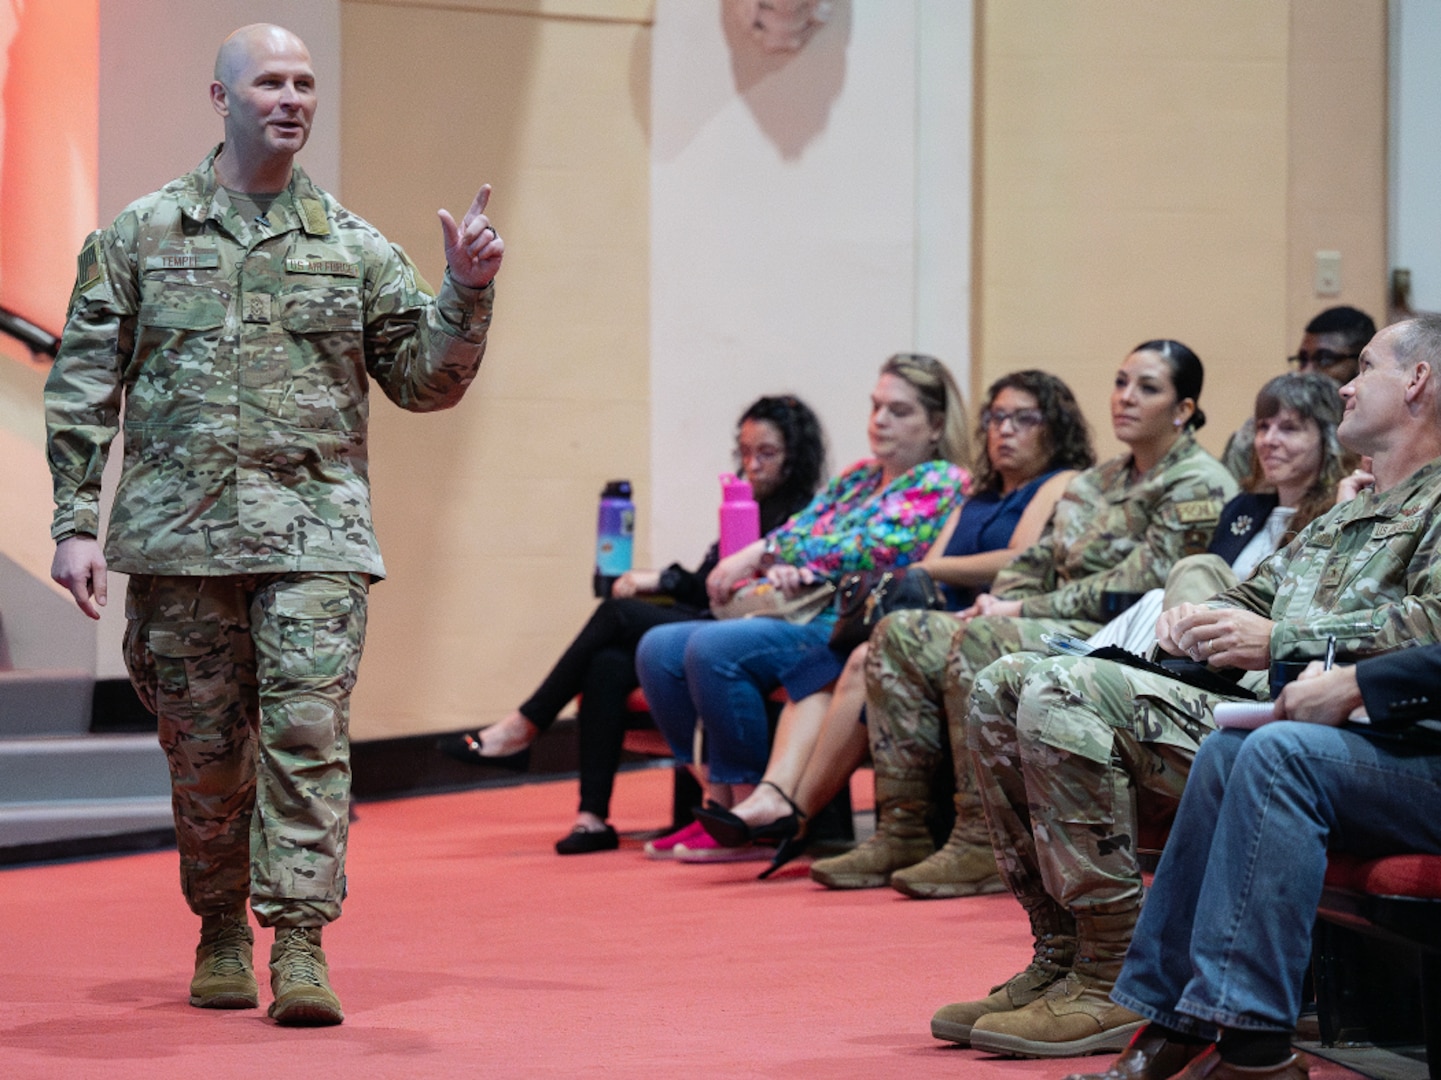 JBSA hosts Air Force Deputy Chief of Staff for Manpower, Personnel and Services for town halls